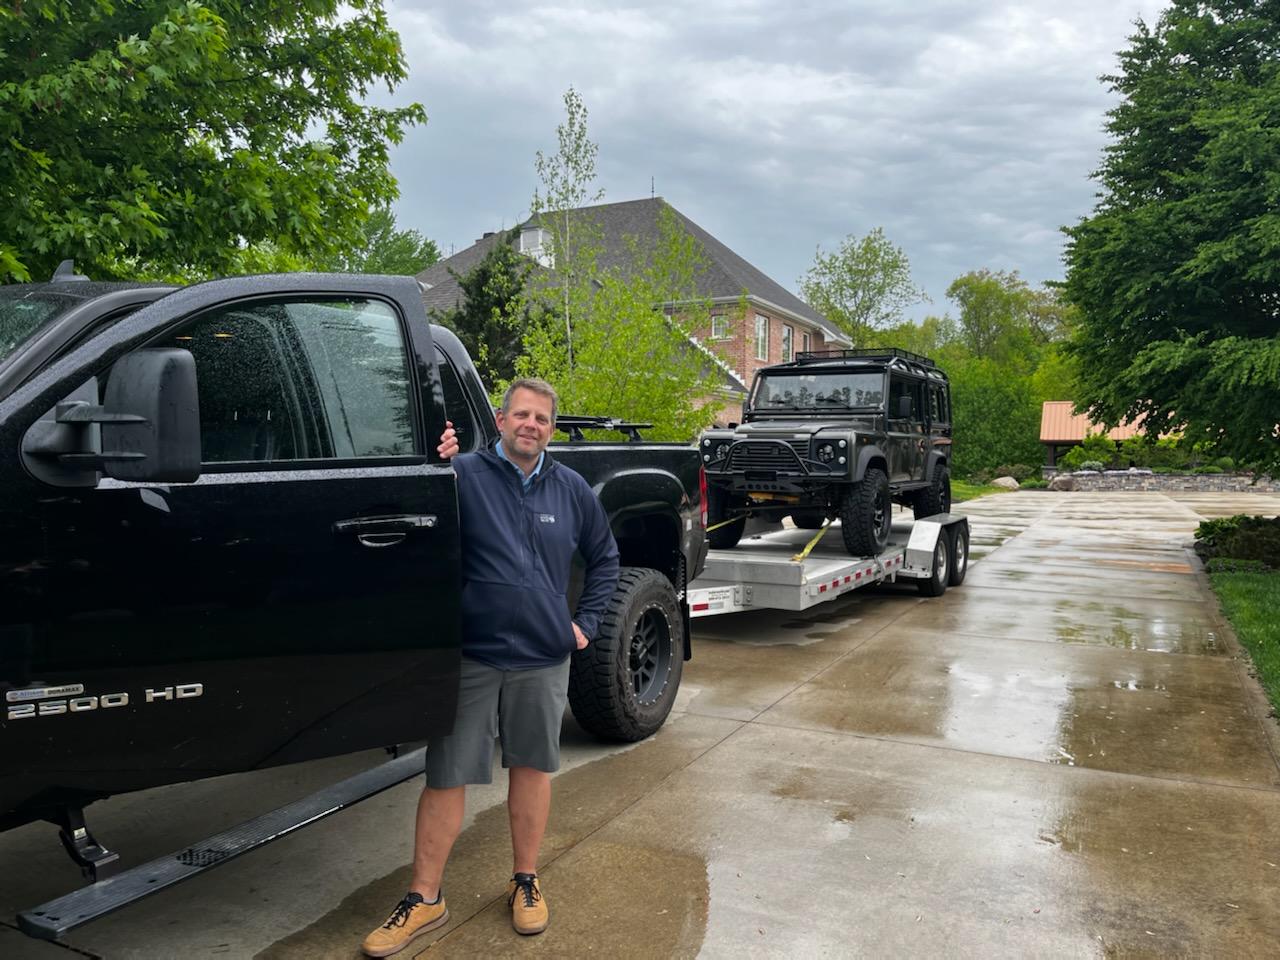 A man stands holding the driver's side door of a large black pickup truck parked on a wet driveway. The truck, ideal for overland adventures, is hitched to a trailer carrying a black off-road vehicle. Trees and a brick house are visible in the background. The sky is overcast.
